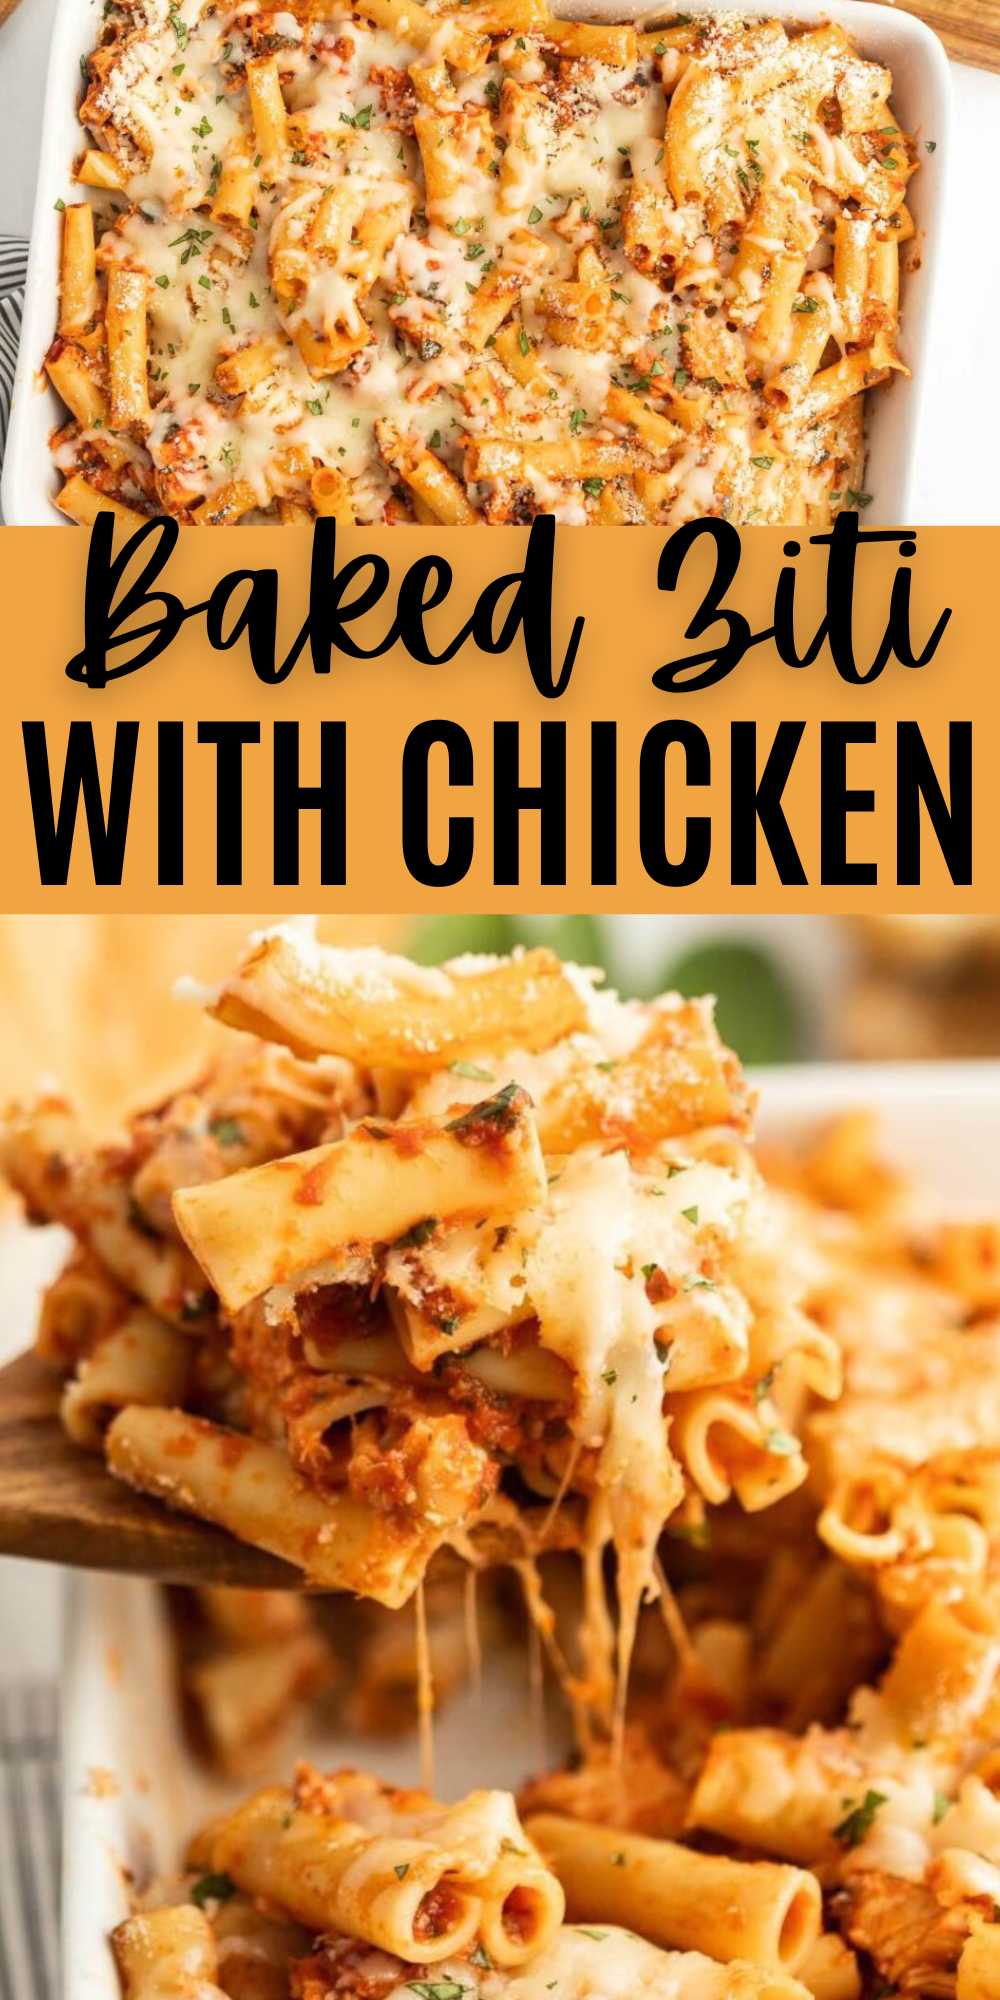 If you are looking for an easy casserole this Baked Ziti with Chicken is it. It is loaded with simple ingredients for a family dinner idea. This cheesy, hearty casserole is always a crowd favorite. It is the best comfort food that is the perfect blend of pasta, chicken and cheese that is easily baked in a baking pan. #eatingonadime #bakedzitiwithchicken #casserolesrecipes #bakedziti